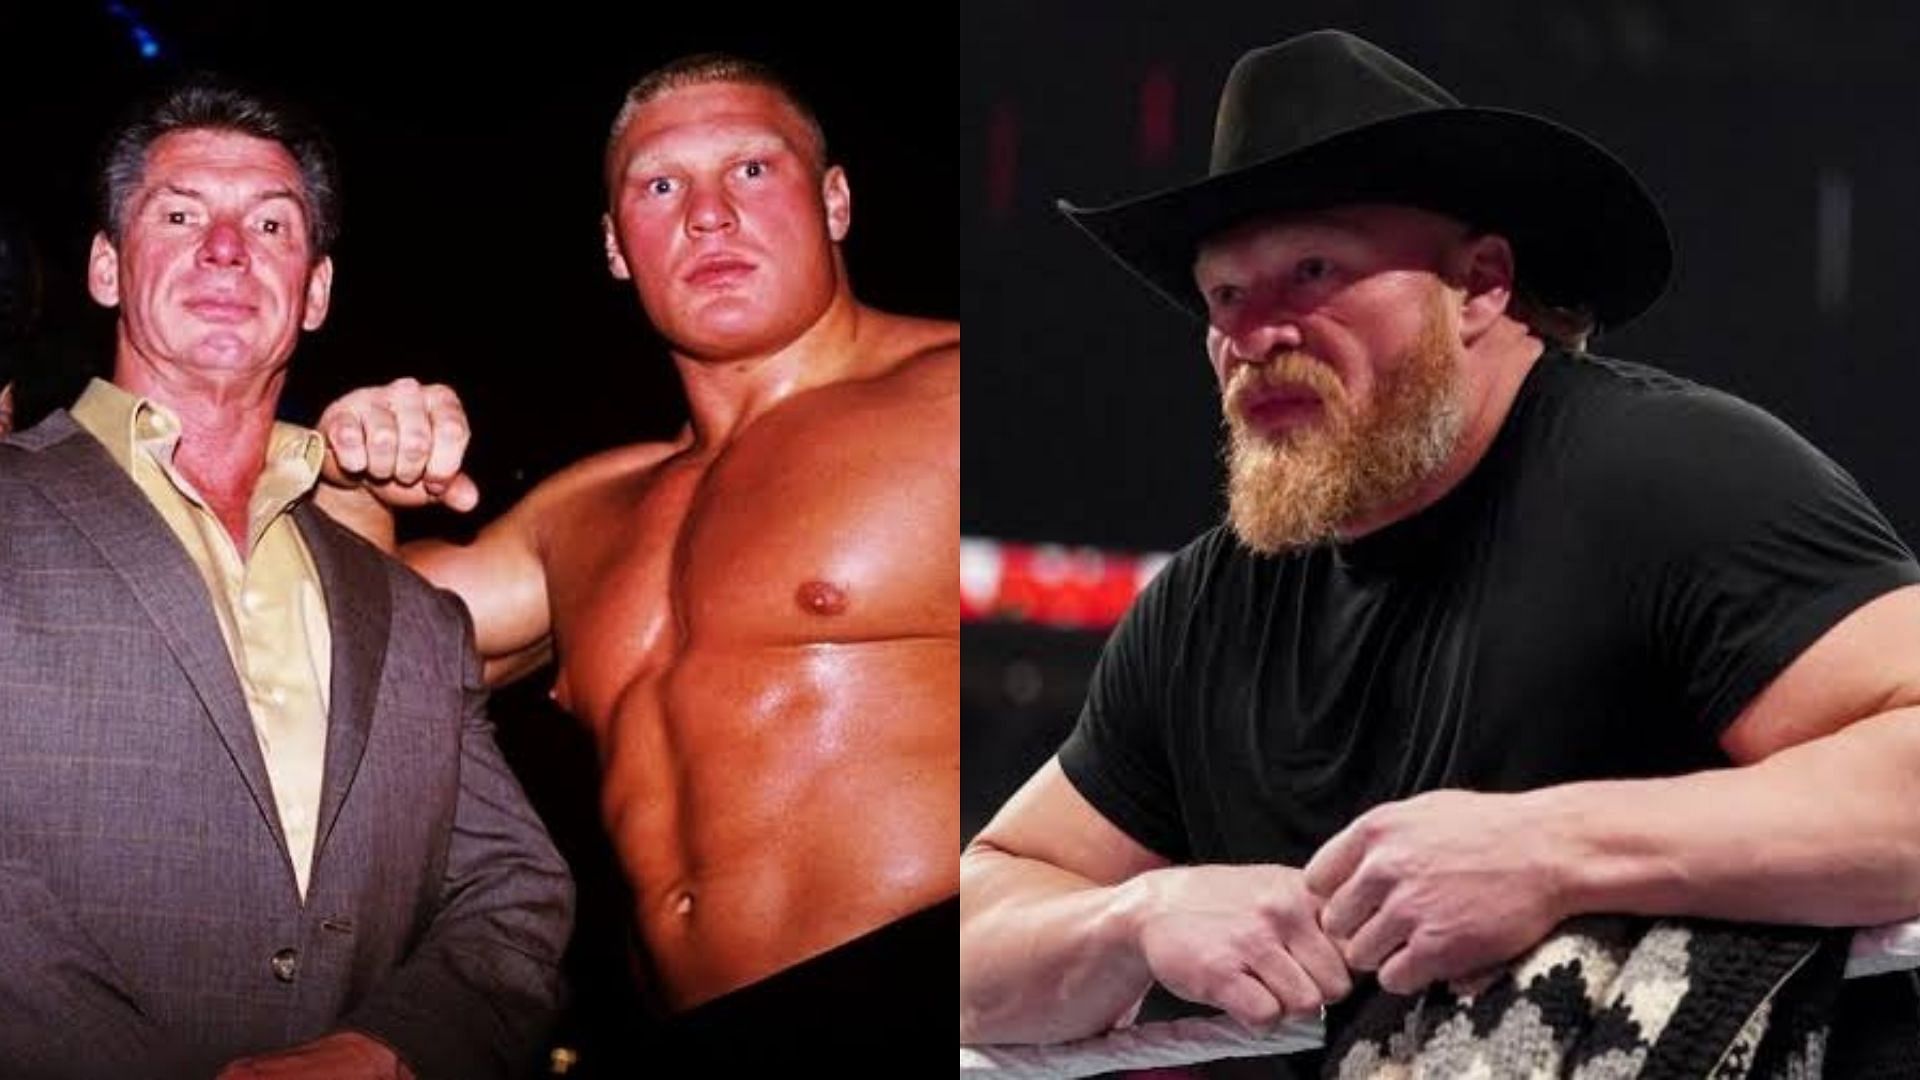 Vince McMahon and Brock Lesnar have developed quite the relationship with each other over the years